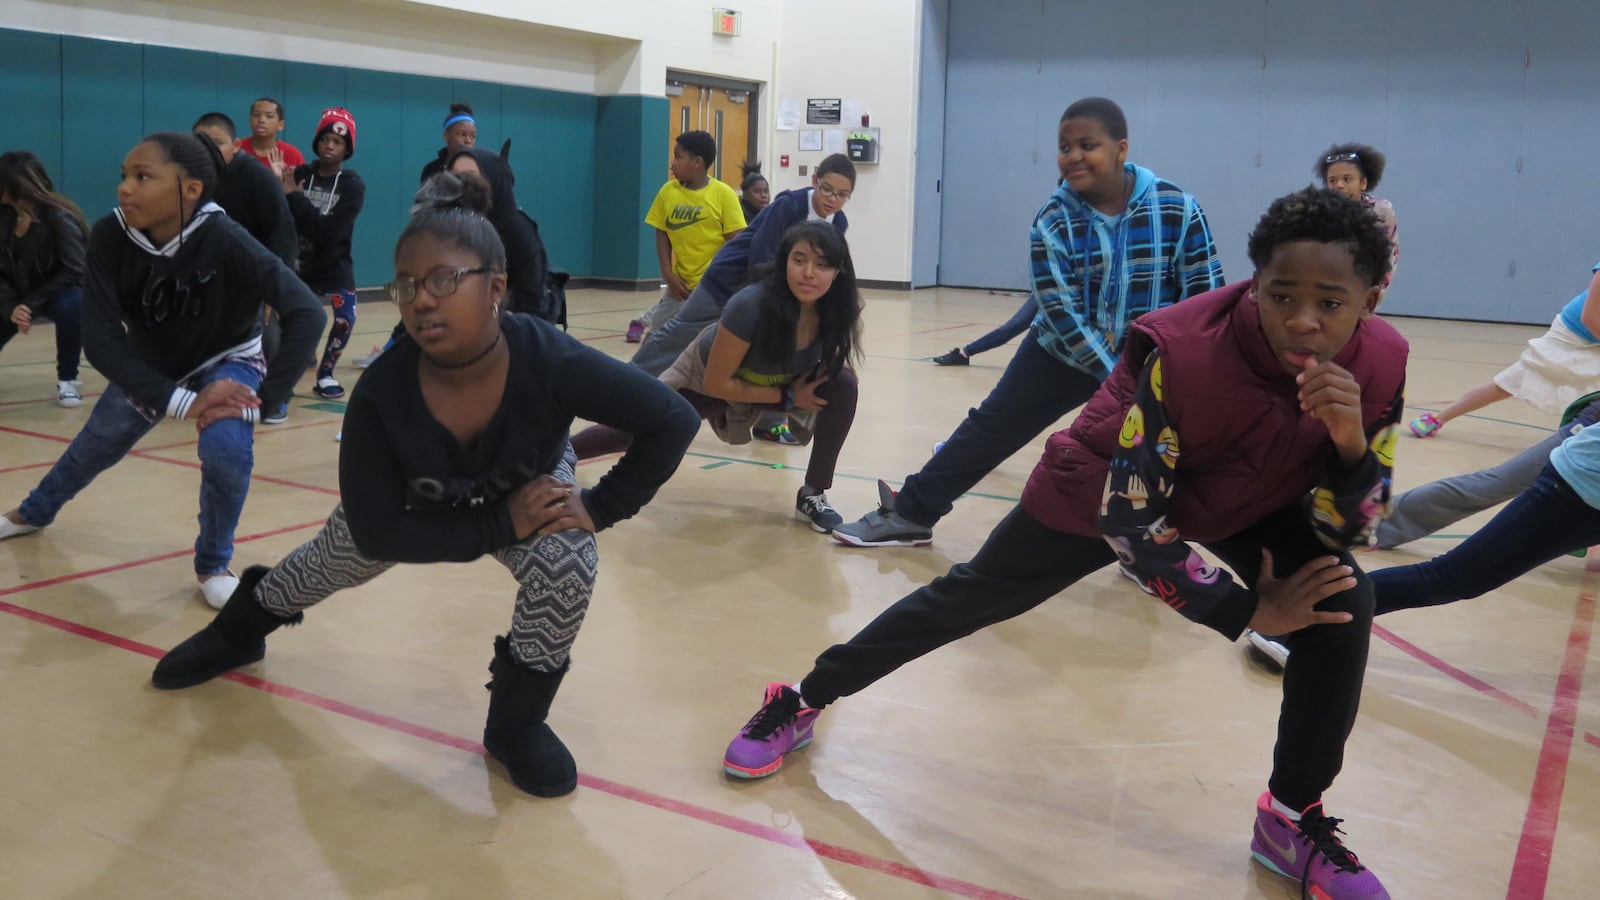 Students at Harrison Hill Elementary School warm up during dance class.